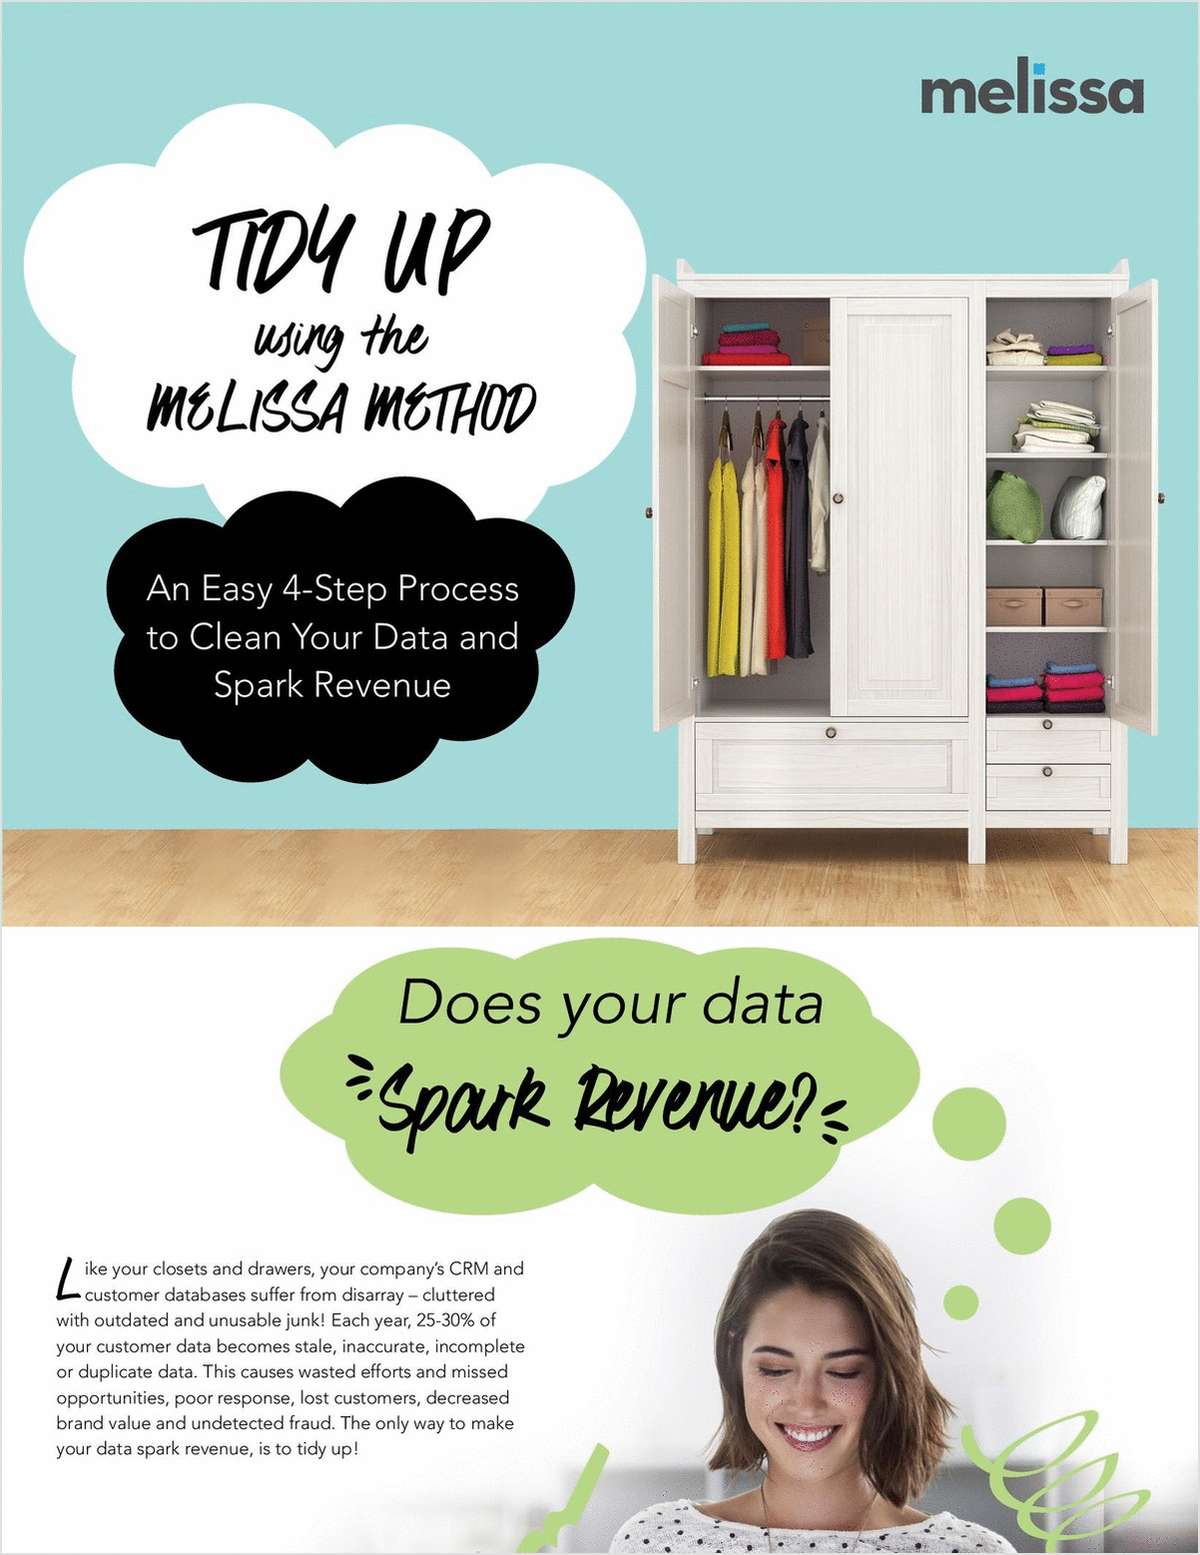 Tidy Up: An Easy 4-Step Process To Clean Your Data and Spark Revenue link